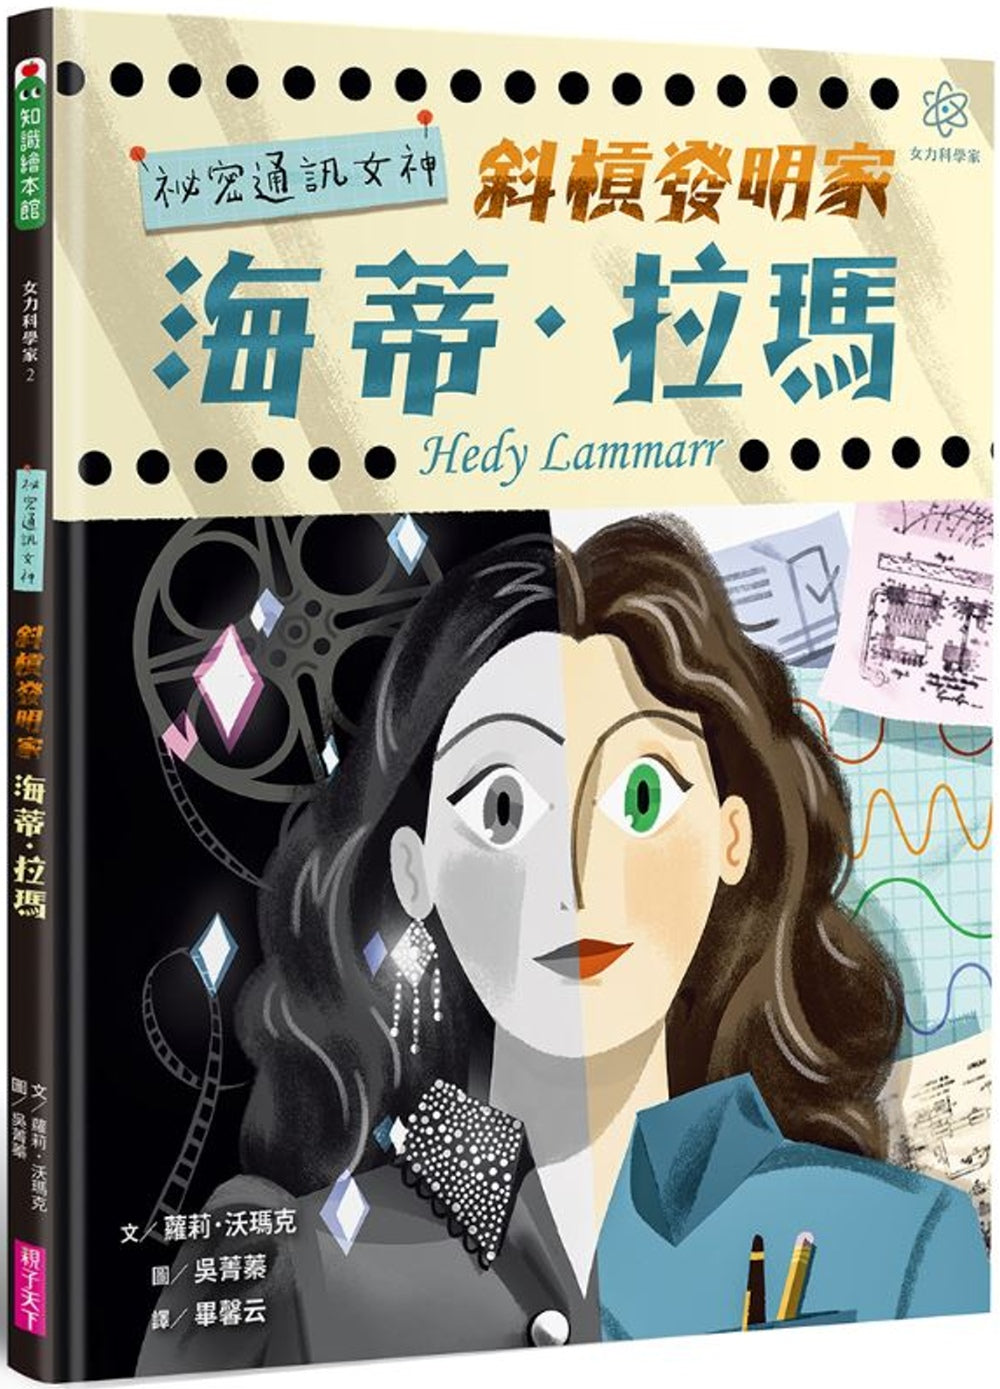 Hedy Lamarr's Double Life: Hollywood Legend and Brilliant Inventor • 女力科學家2：祕密通訊女神 斜槓發明家海蒂‧拉瑪